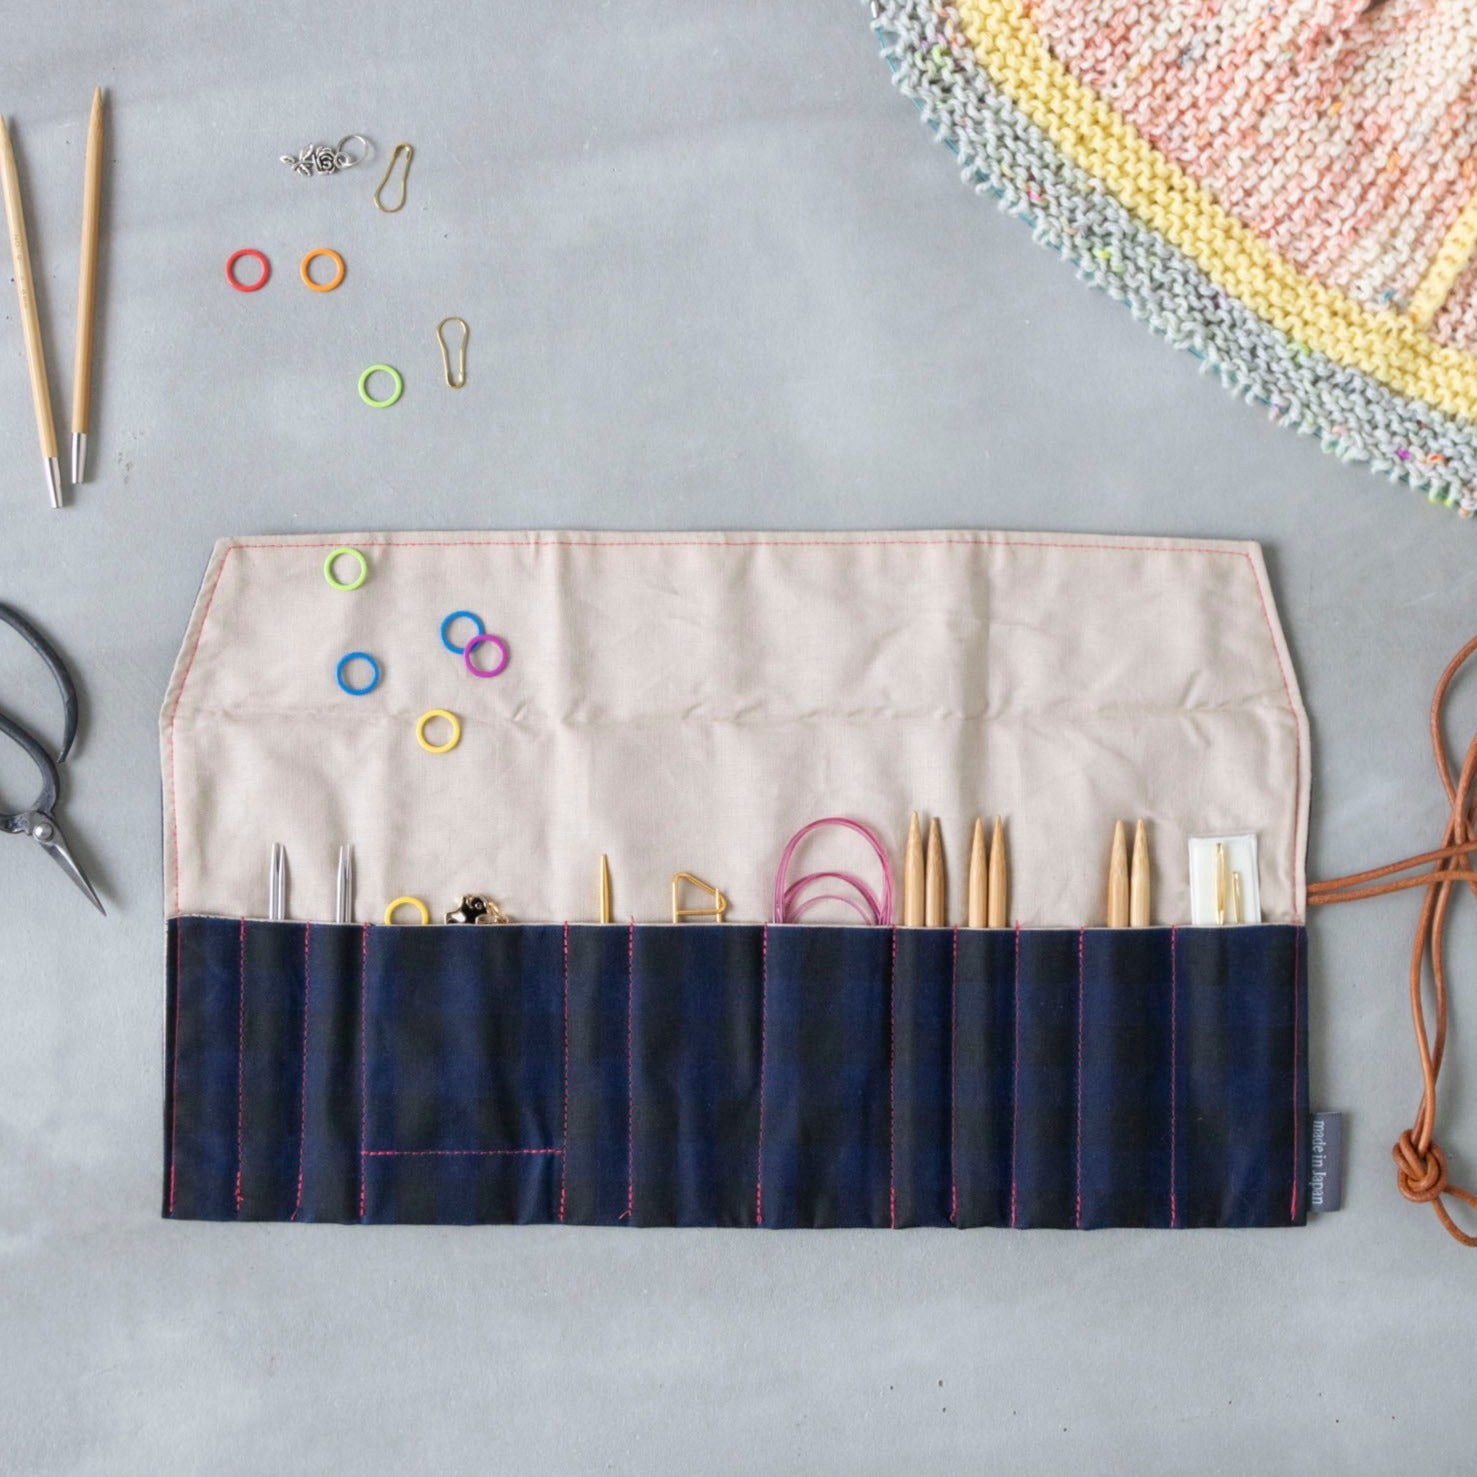 【sewing kit】Project Needle Case